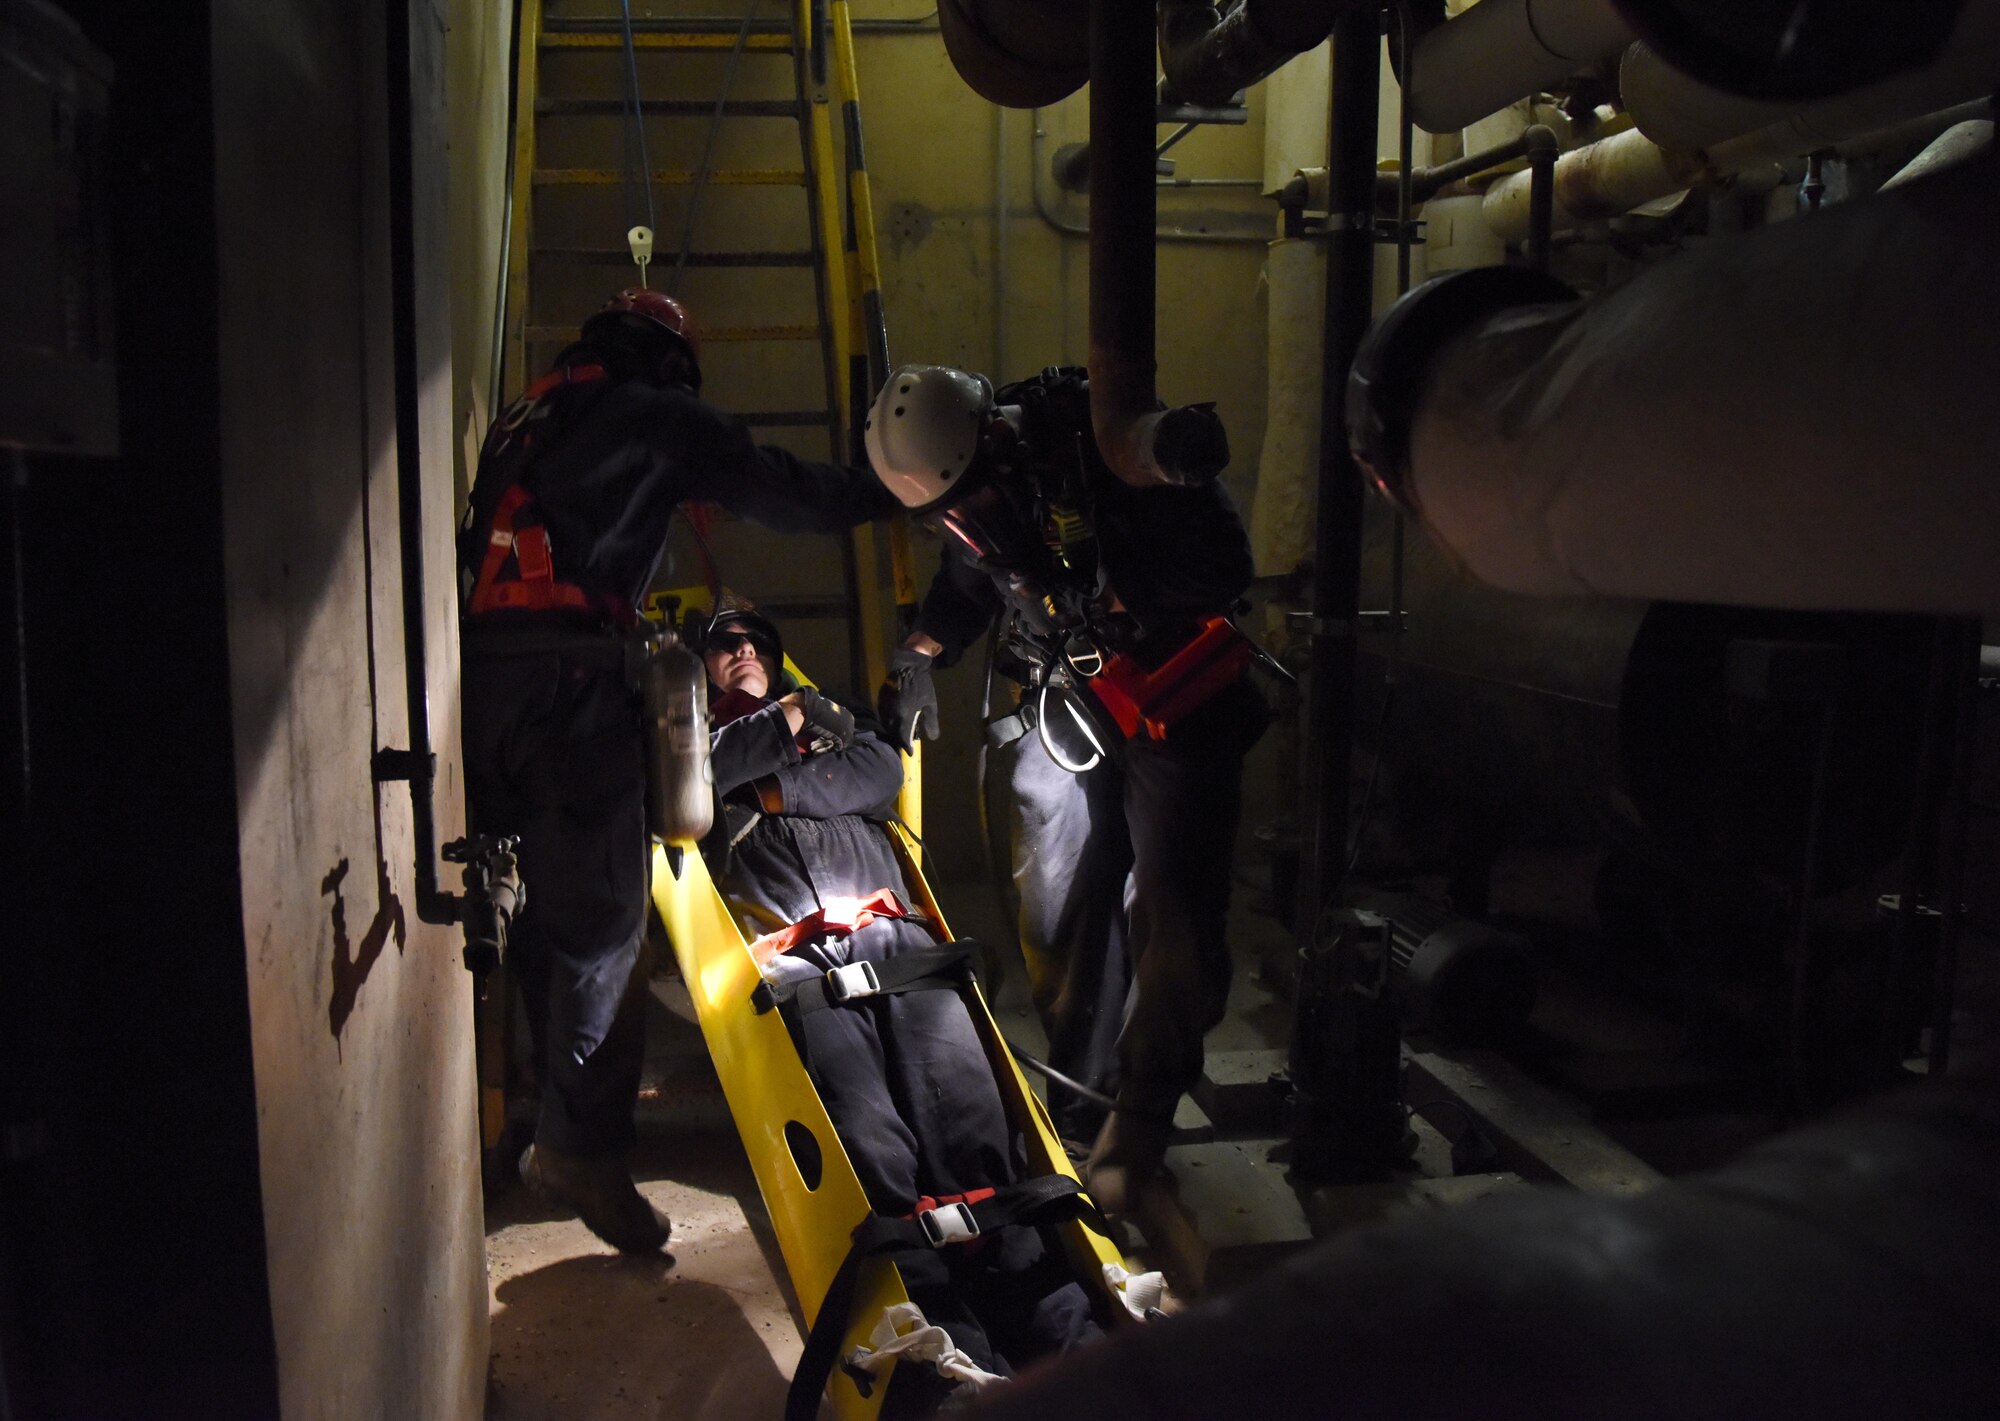 Members of the Keesler and Biloxi Fire Departments participate in confined space rescue operations training in the Keesler Medical Center June 16, 2017, on Keesler Air Force Base, Miss. Keesler hosted the advanced rescue certification training course, which consisted of confined space rescue, high and low angle rescue and stokes basket rescue operations. (U.S. Air Force photo by Kemberly Groue)